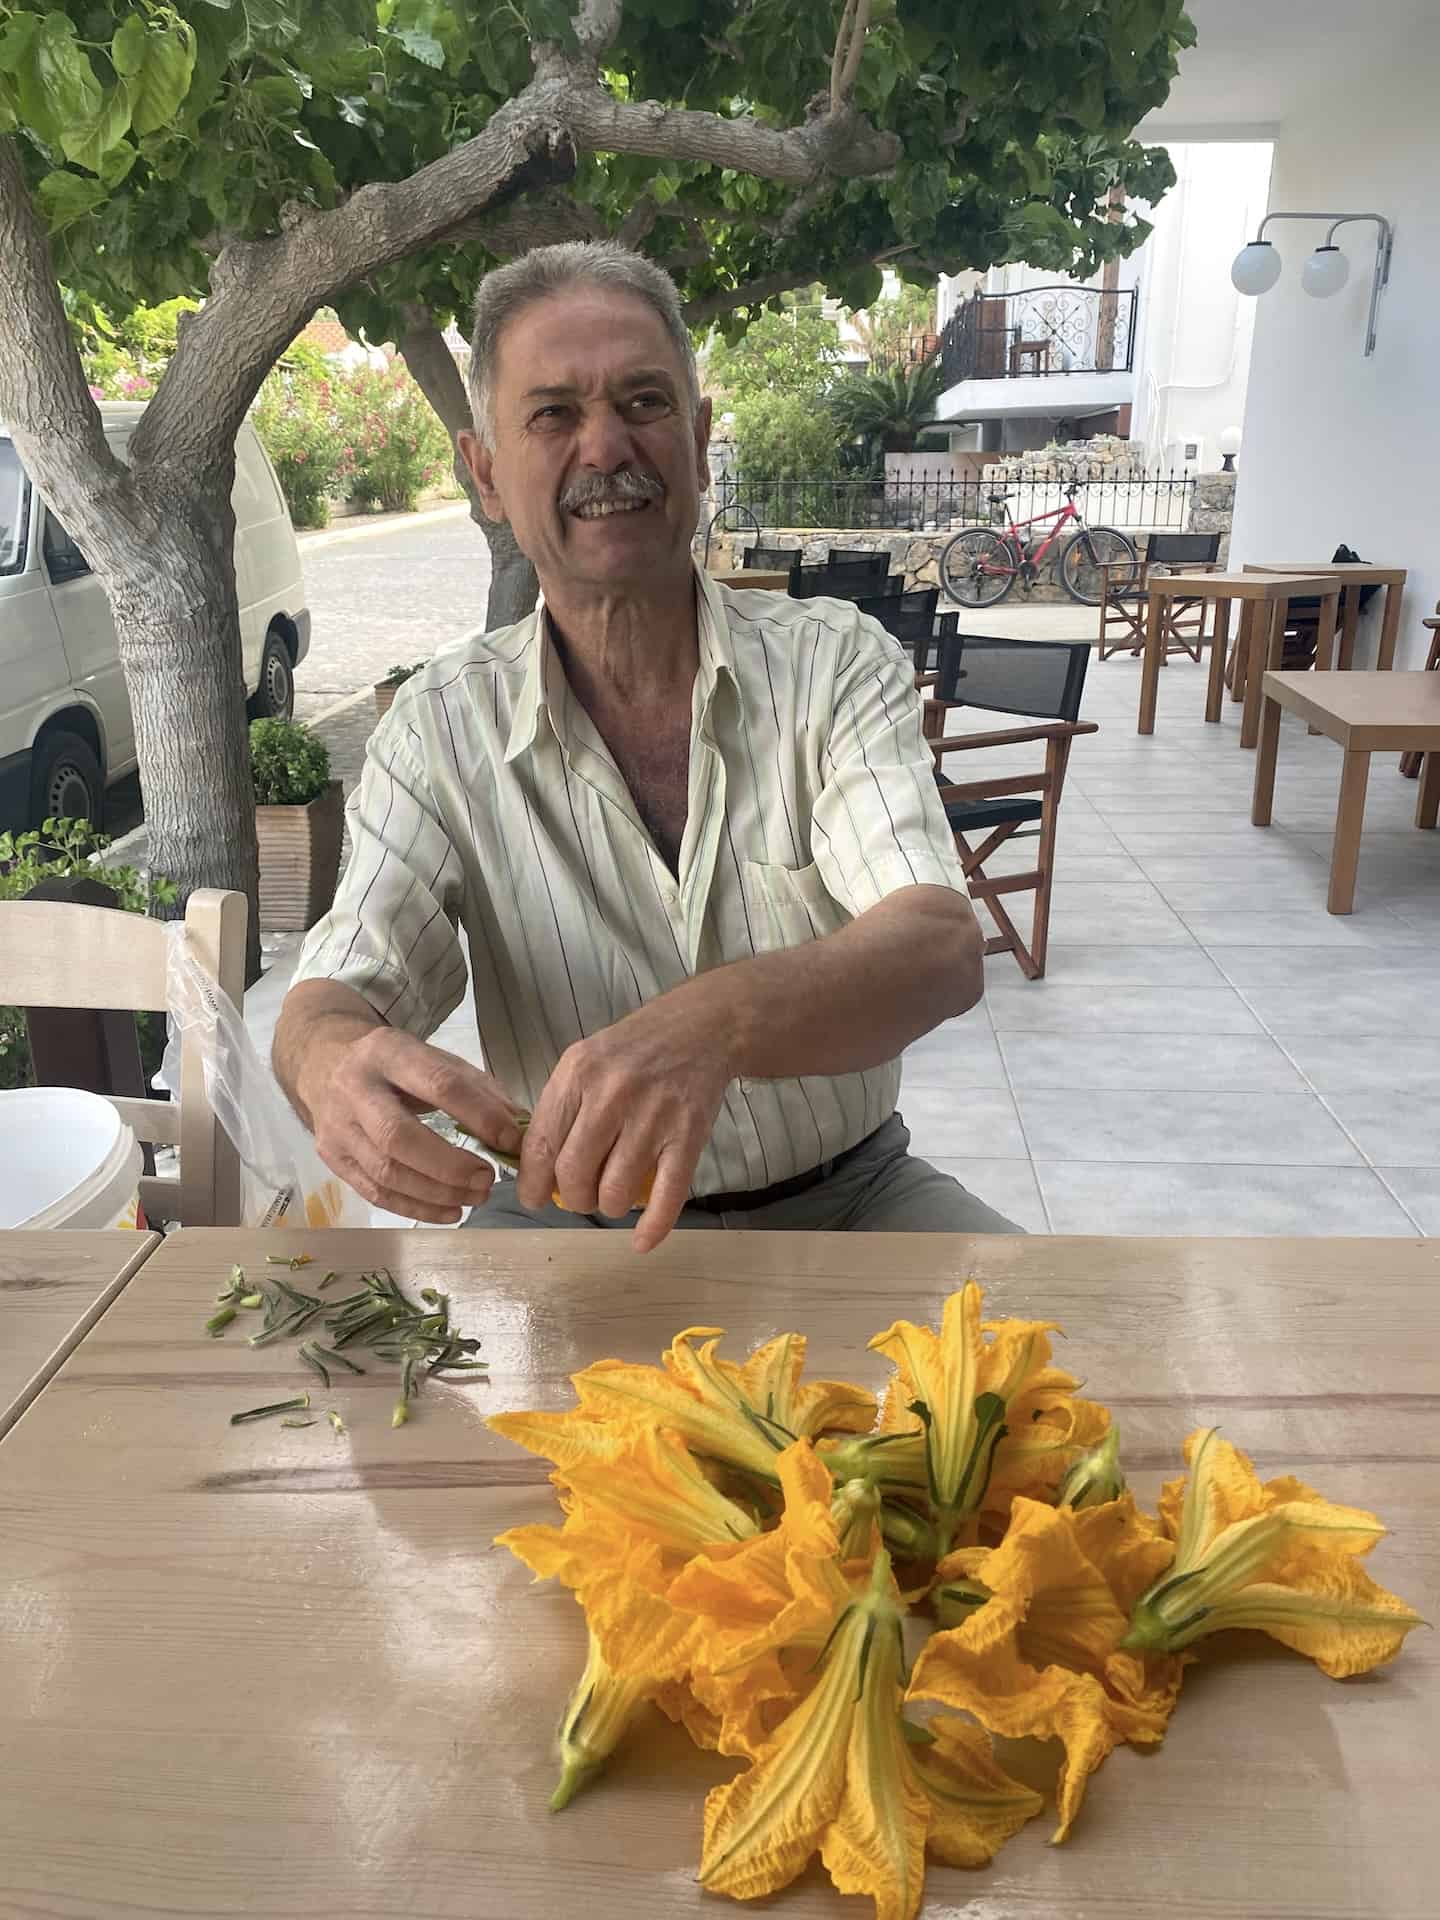 The owner preparing zucchini flowers for dinner at Hotel Calypso at Agia Roumeli, Crete, Greece